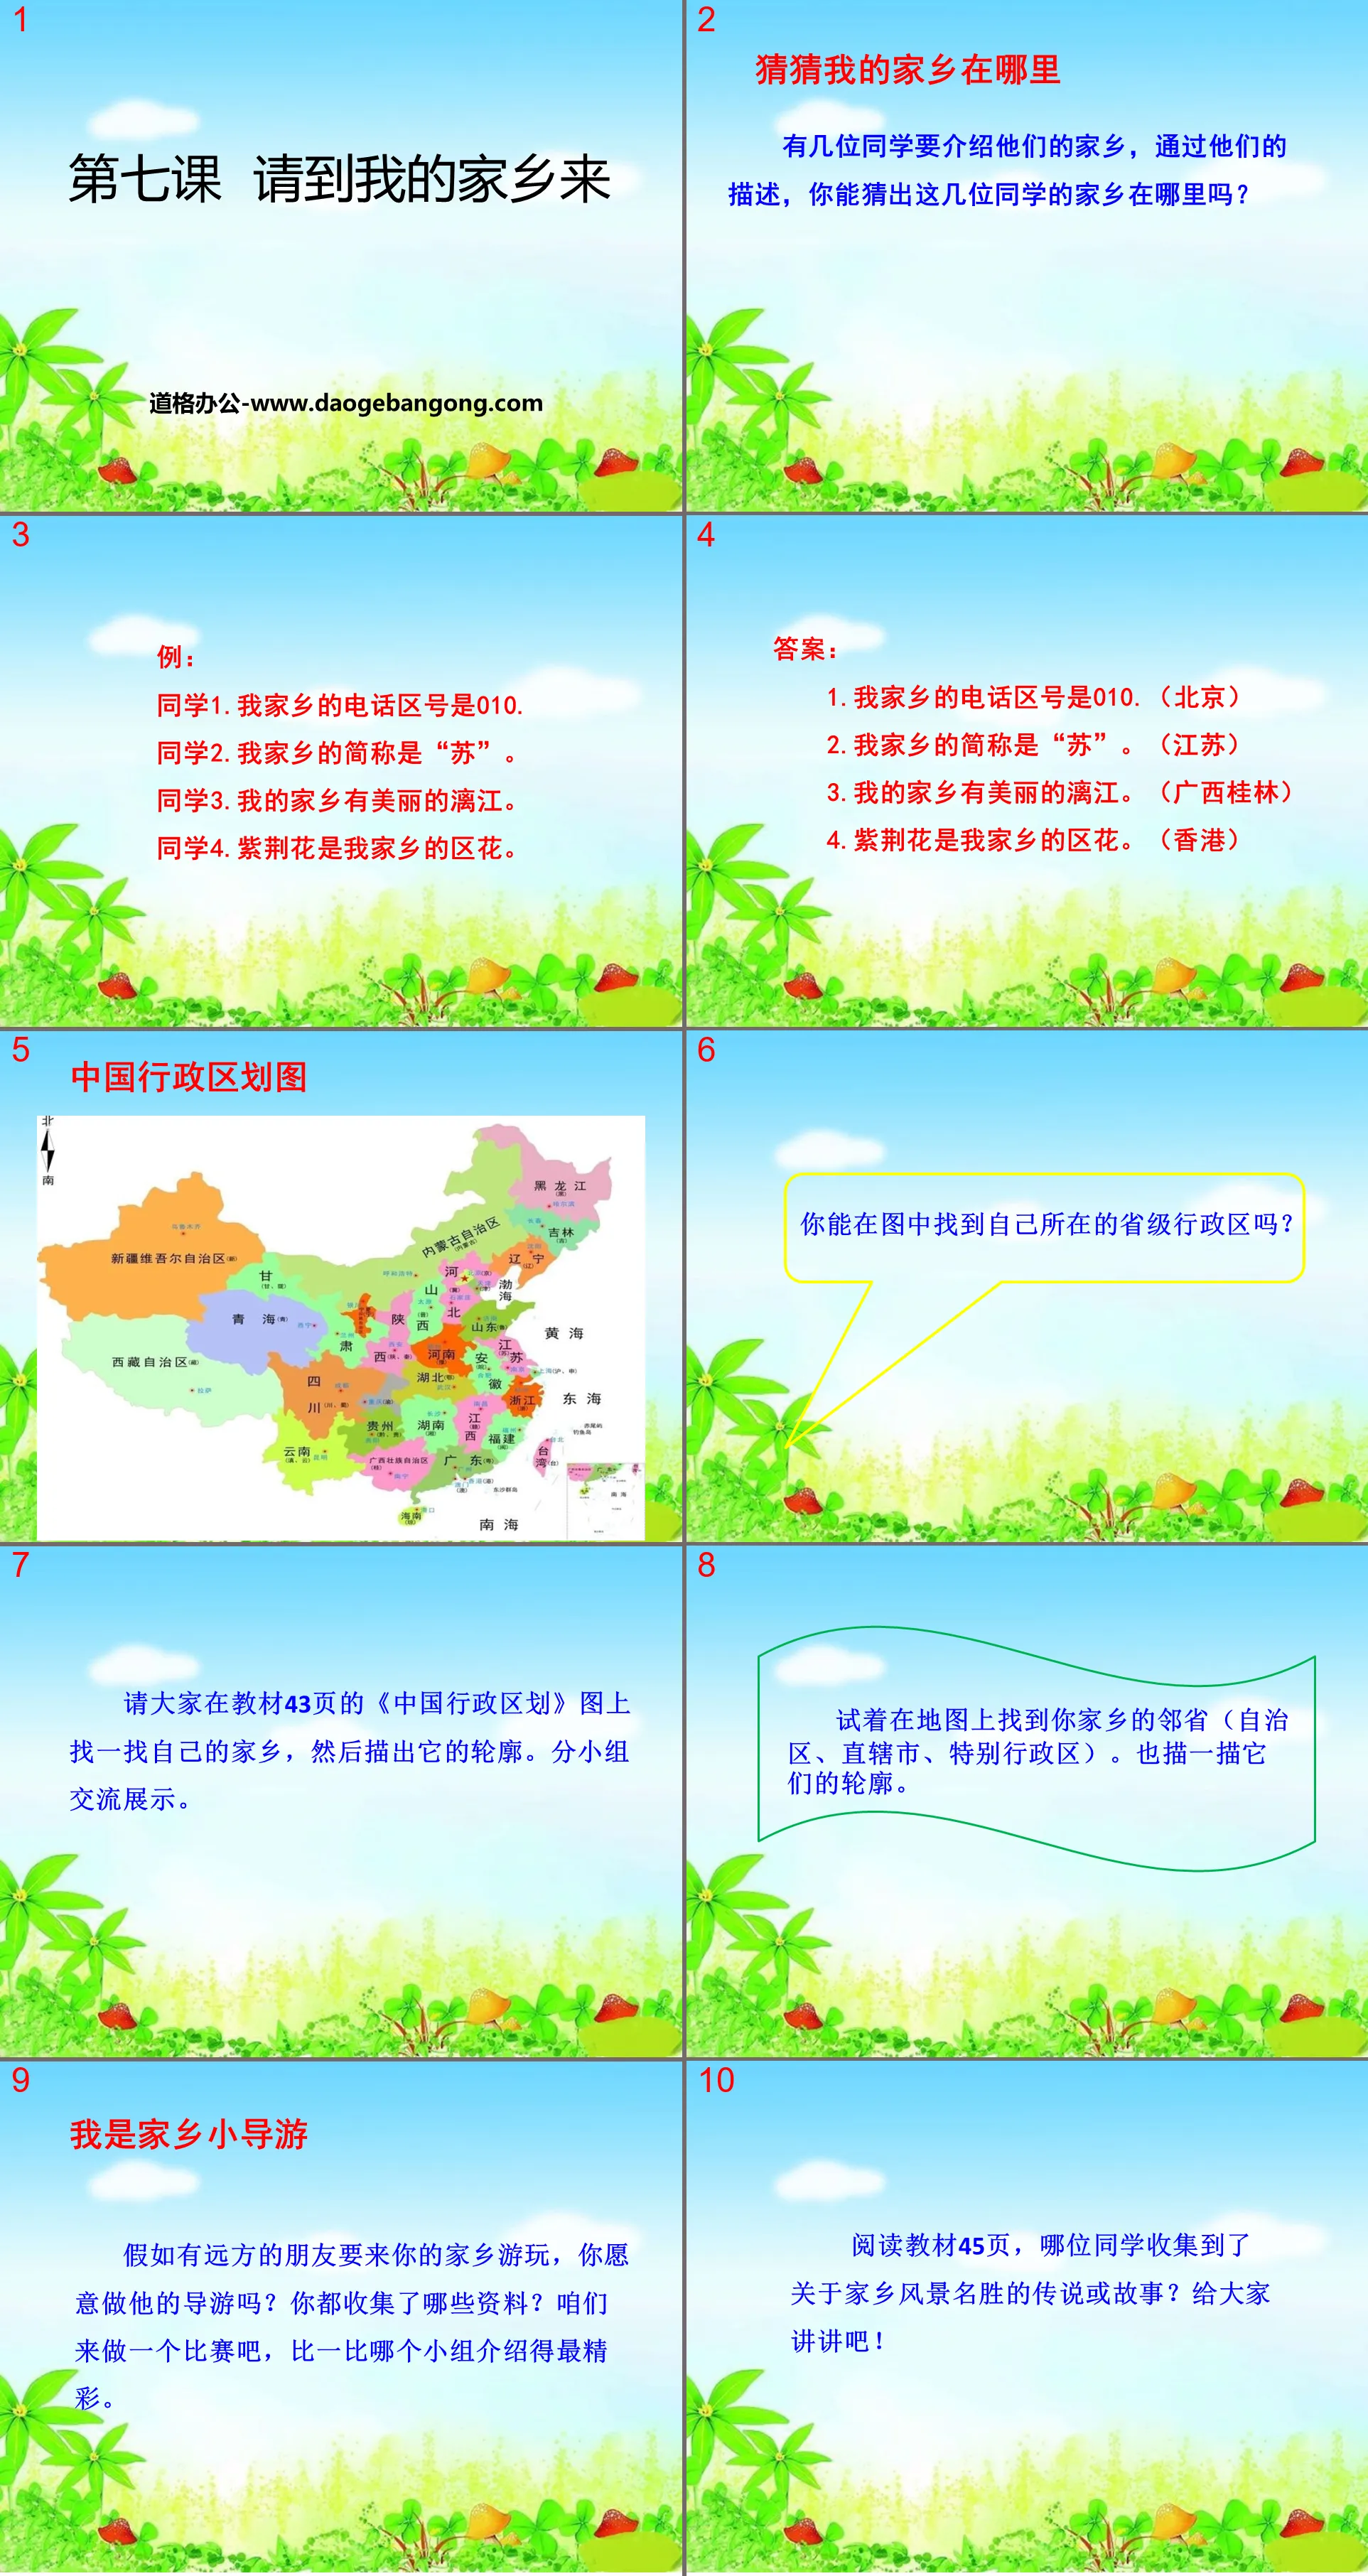 "Please come to my hometown" I grew up here PPT courseware